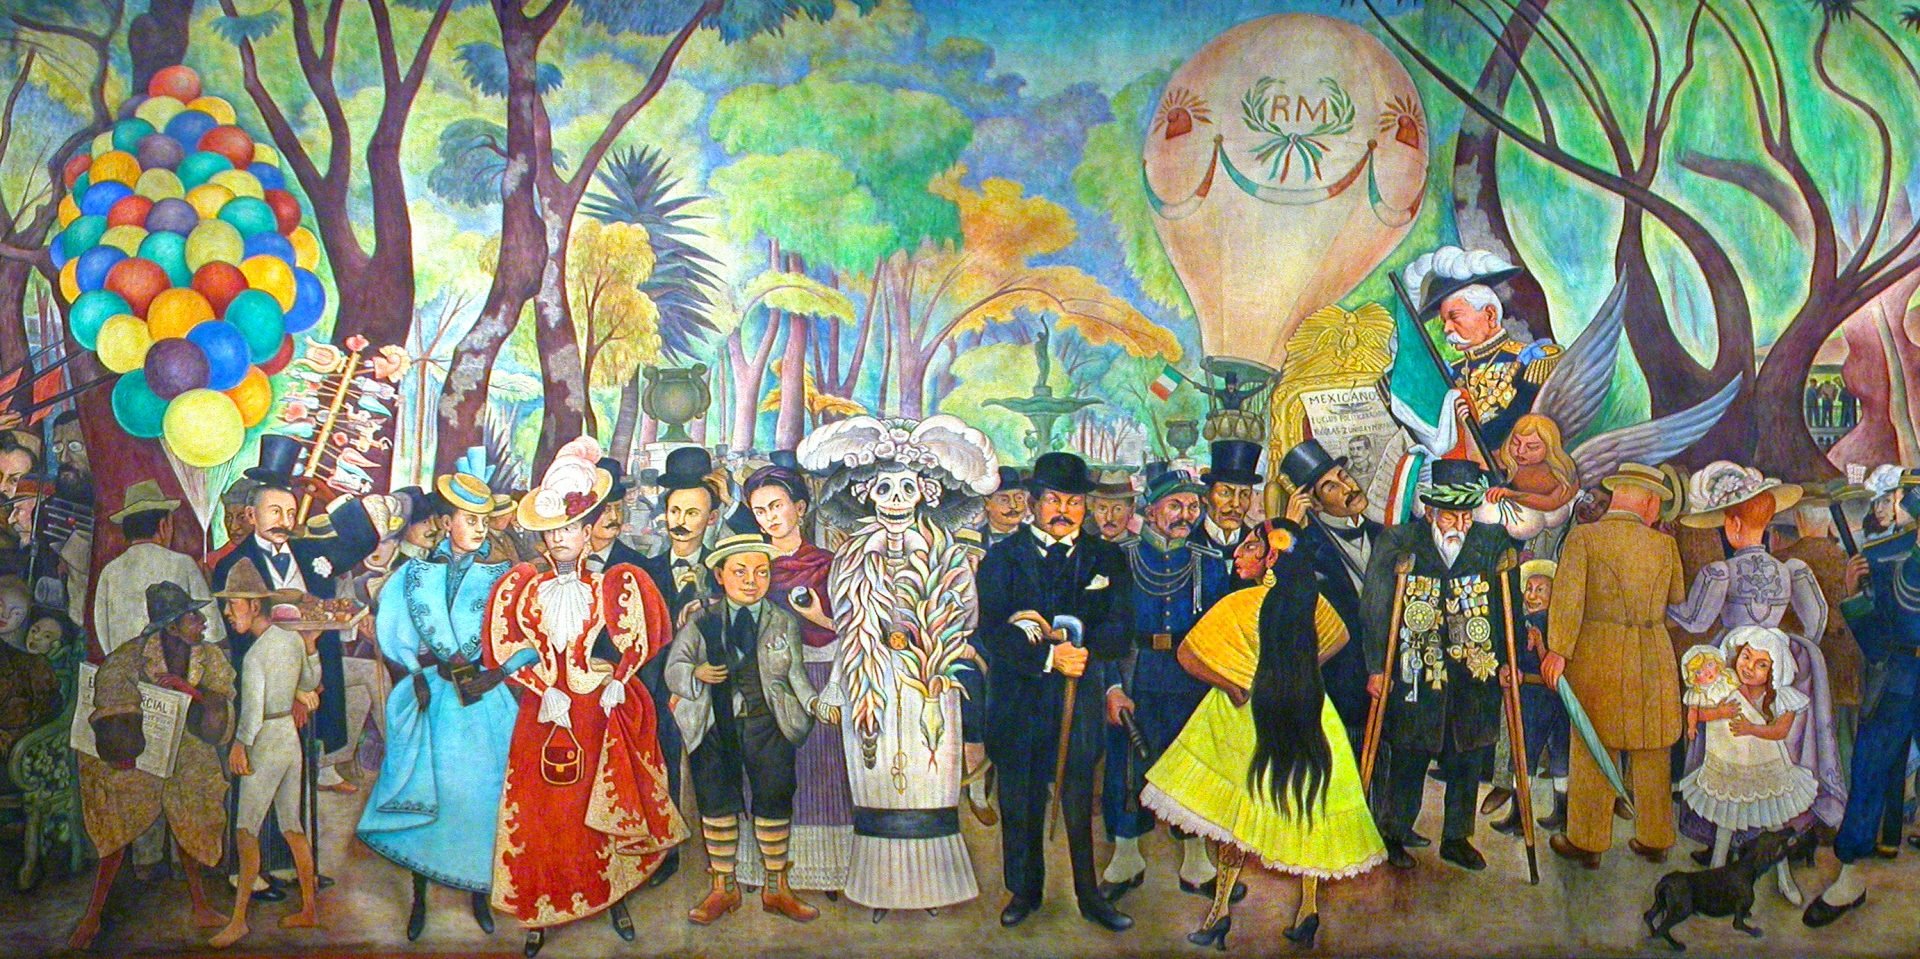 The mural captures pivotal moments and figures from Mexico's history, set in Mexico City's Alameda Central park. Notable figures include Frida Kahlo, Benito Juárez, Porfirio Díaz, La Malinche, and more. The mural centers on bourgeois life before the 1910 Mexican Revolution, with upper-class figures beneath dictator Porfirio Díaz. Nearby, police push back an indigenous family, while Inquisition victims burn to the left. Dominating the center is the skeletal La Calavera Catrina, linked arm-in-arm with her creator, José Guadalupe Posada, and a young Diego Rivera. Frida Kahlo stands protectively behind them, holding a yin-yang symbol.